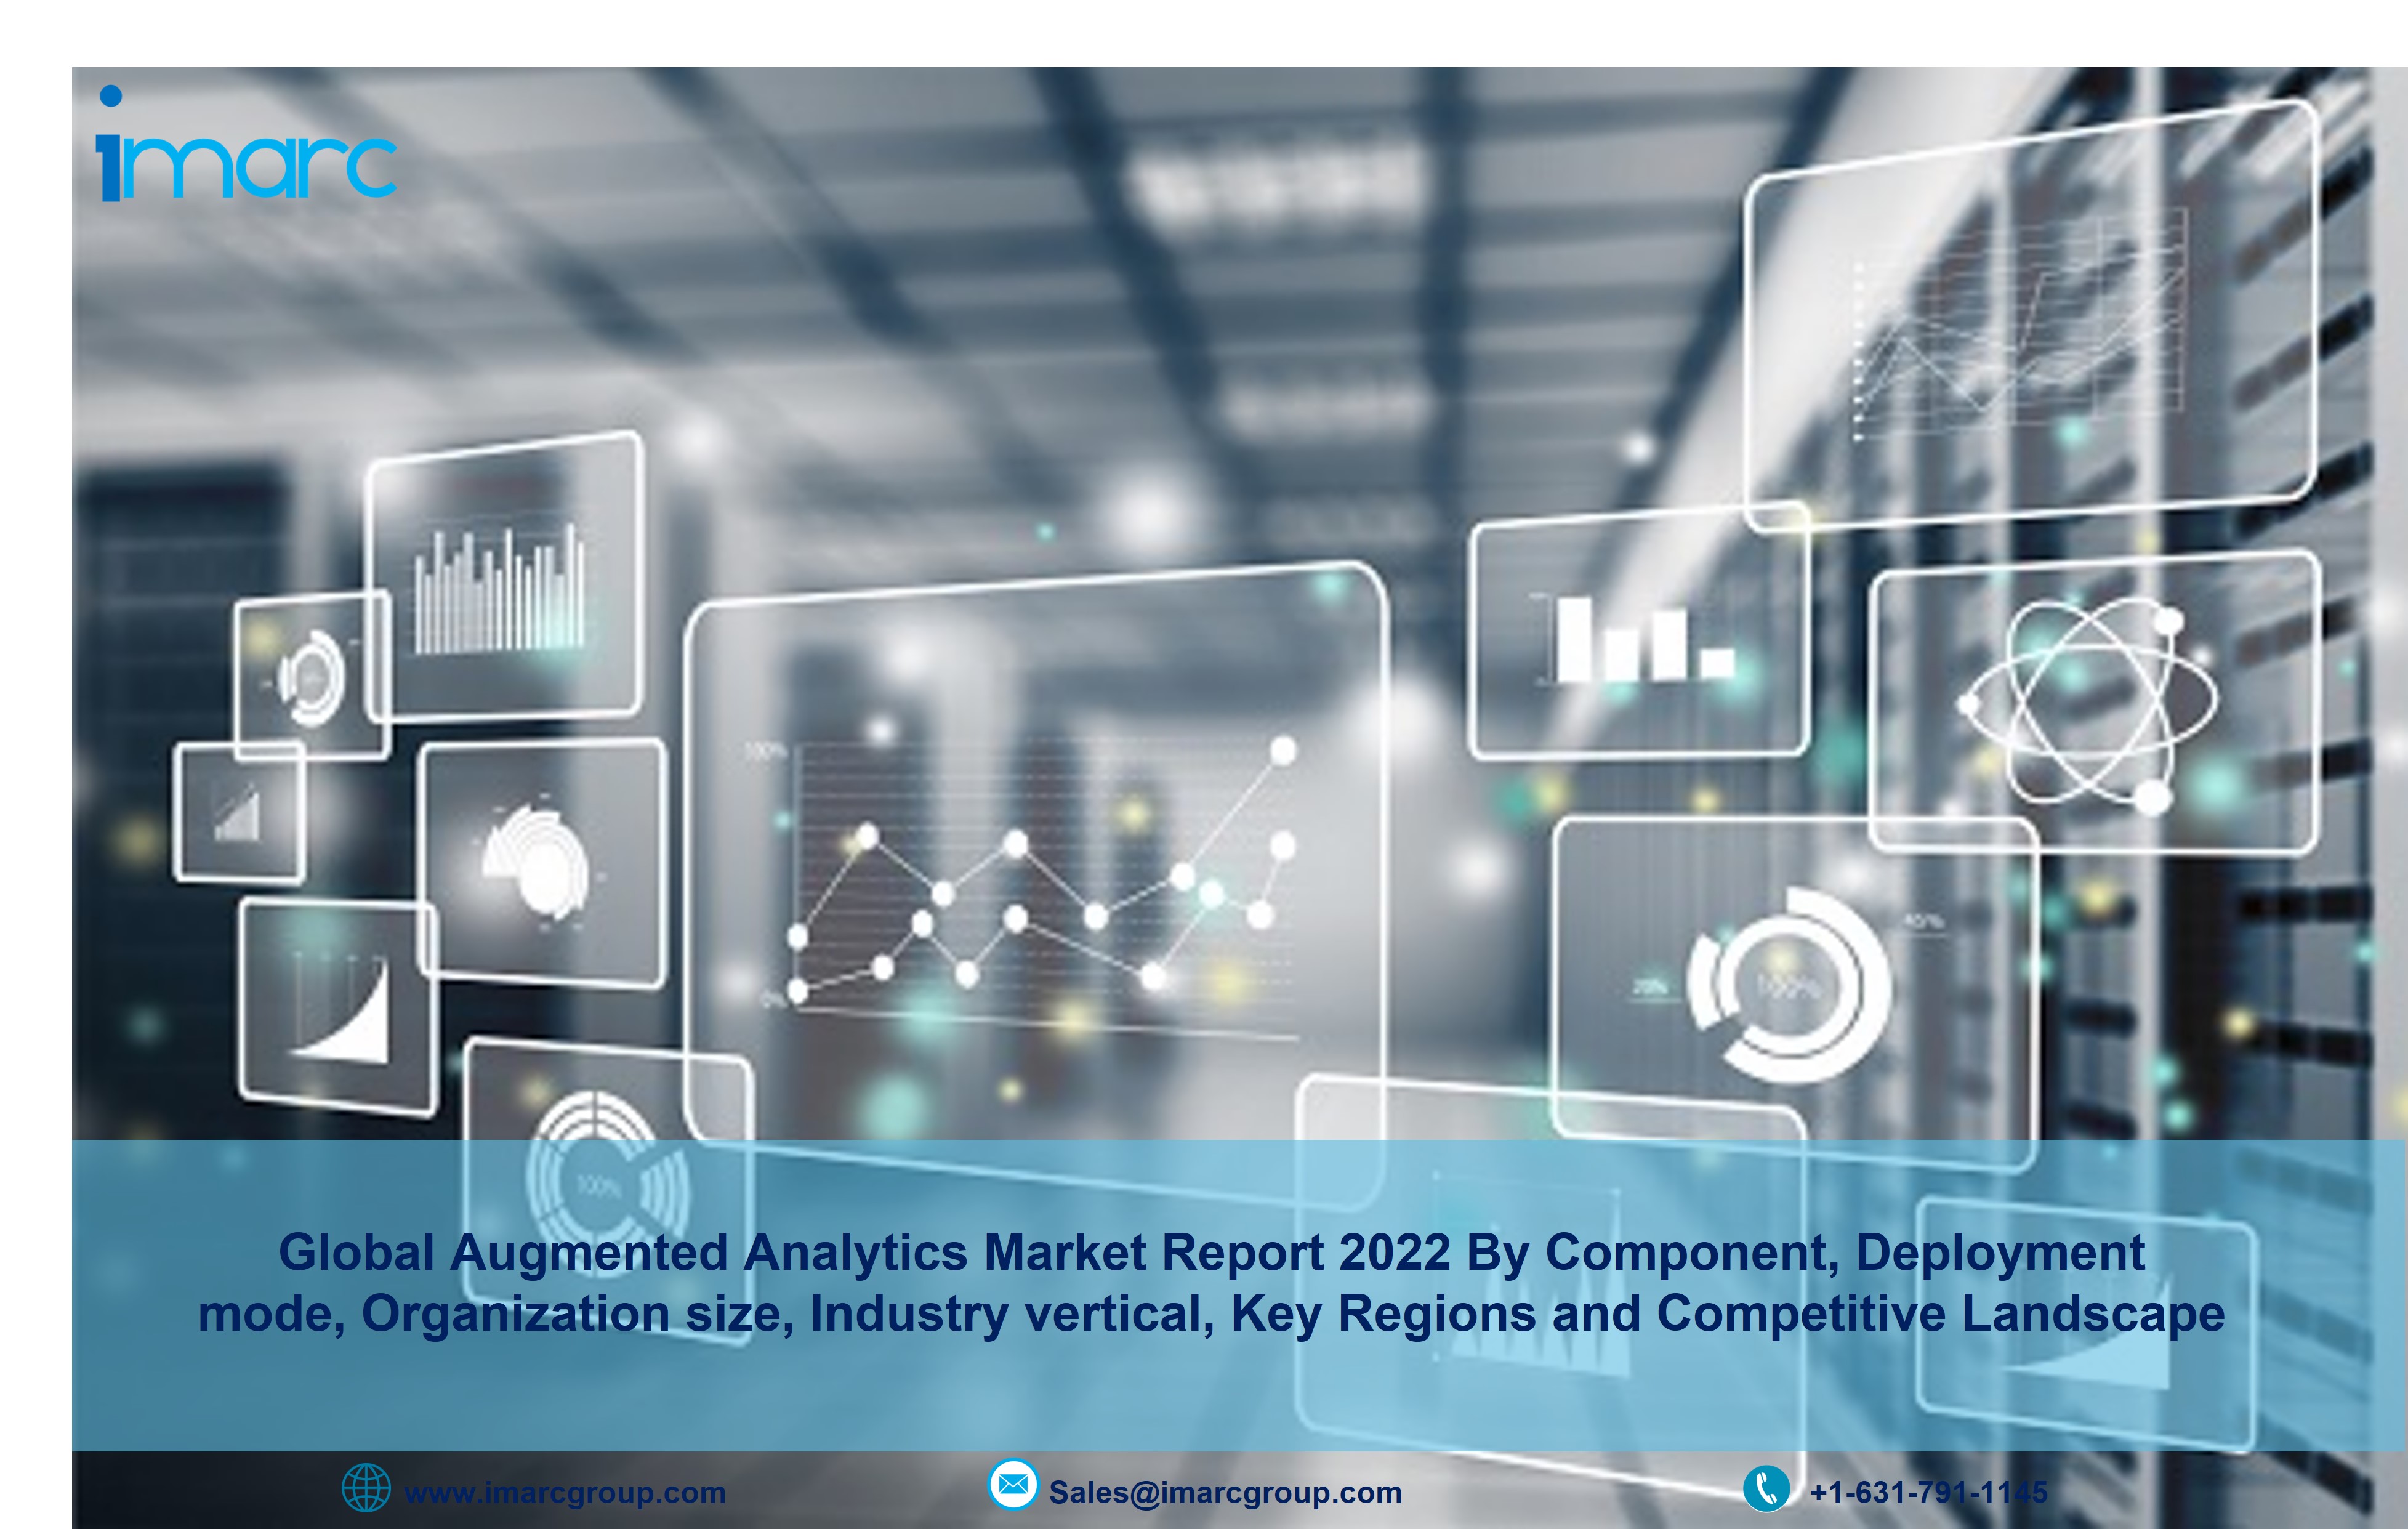 Augmented Analytics Market Size to reach USD 32.64 Billion by 2027 | Industry Forecast, Growth and Share 